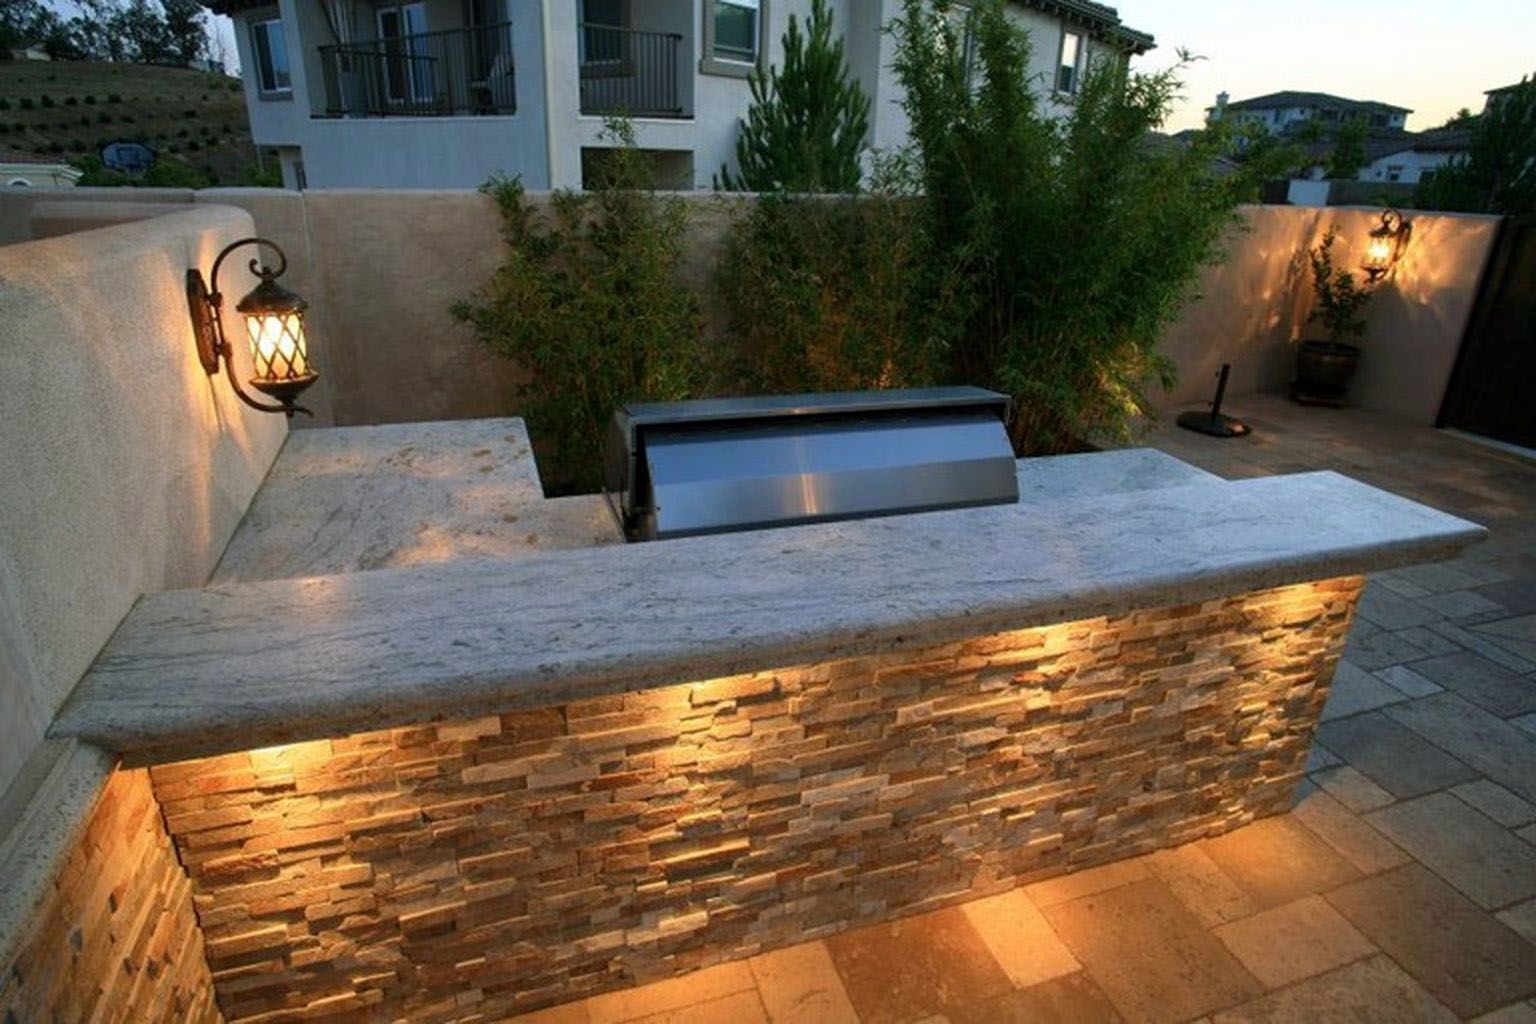 Customizing Outdoor Kitchen Cabinets Will Make Your Appliances Look Better